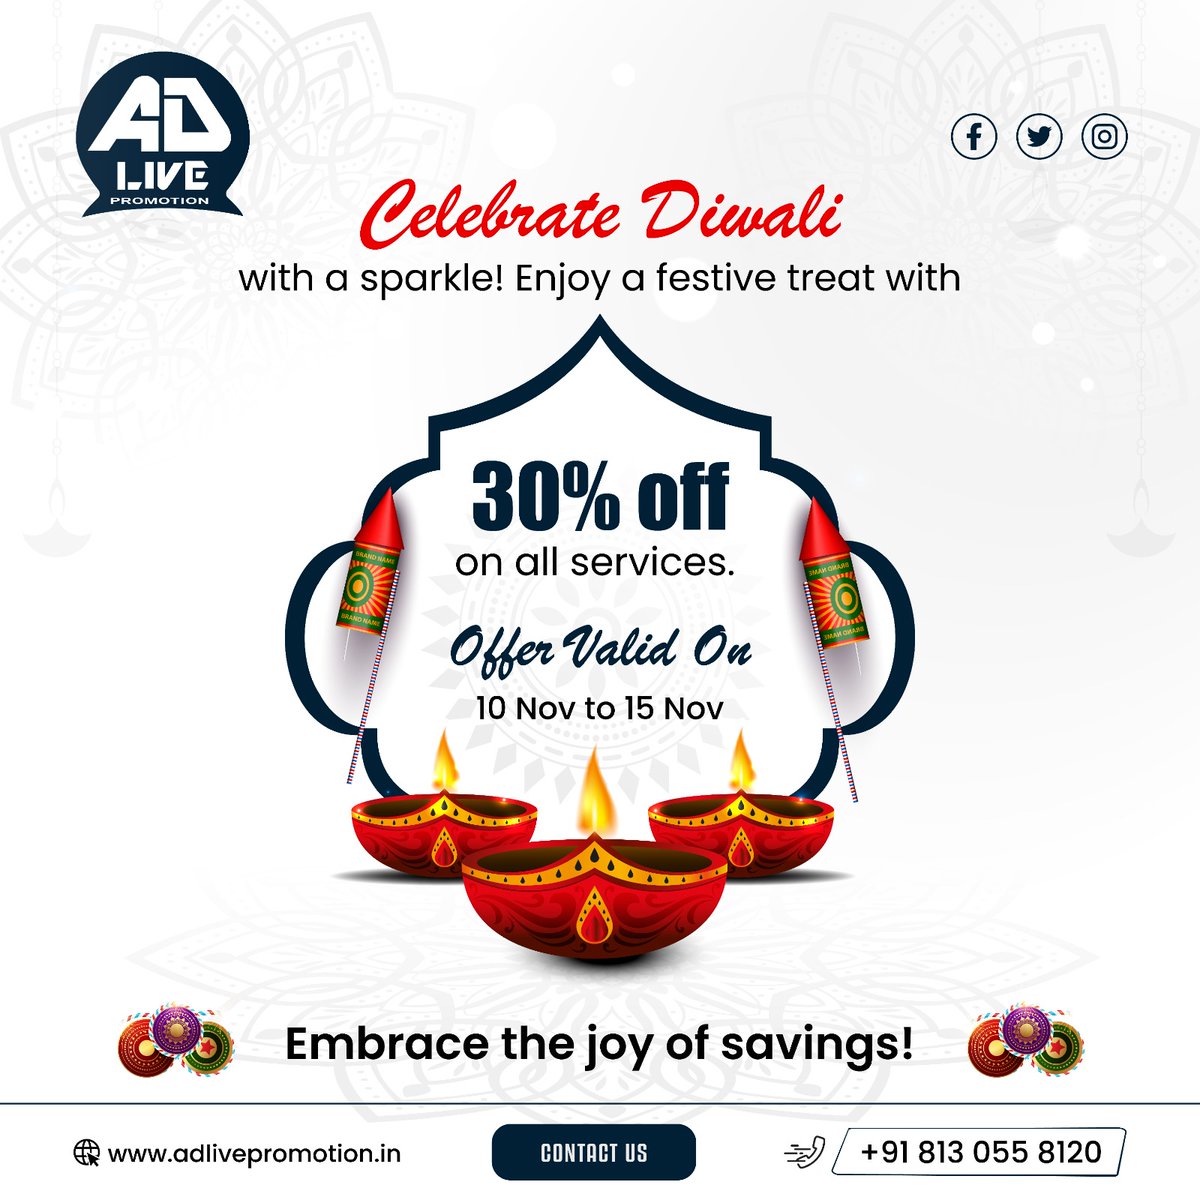 Light up your Diwali with a 30% sparkle! Celebrate the joy of savings on all services. Embrace the festive treat today!
Contact us on : +91 8130558120
Visit our website
adlivepromotion.in

#ADlivepromotion #DiwaliDelights #FestiveSavings #SparklingDiwali #JoyfulDiscounts